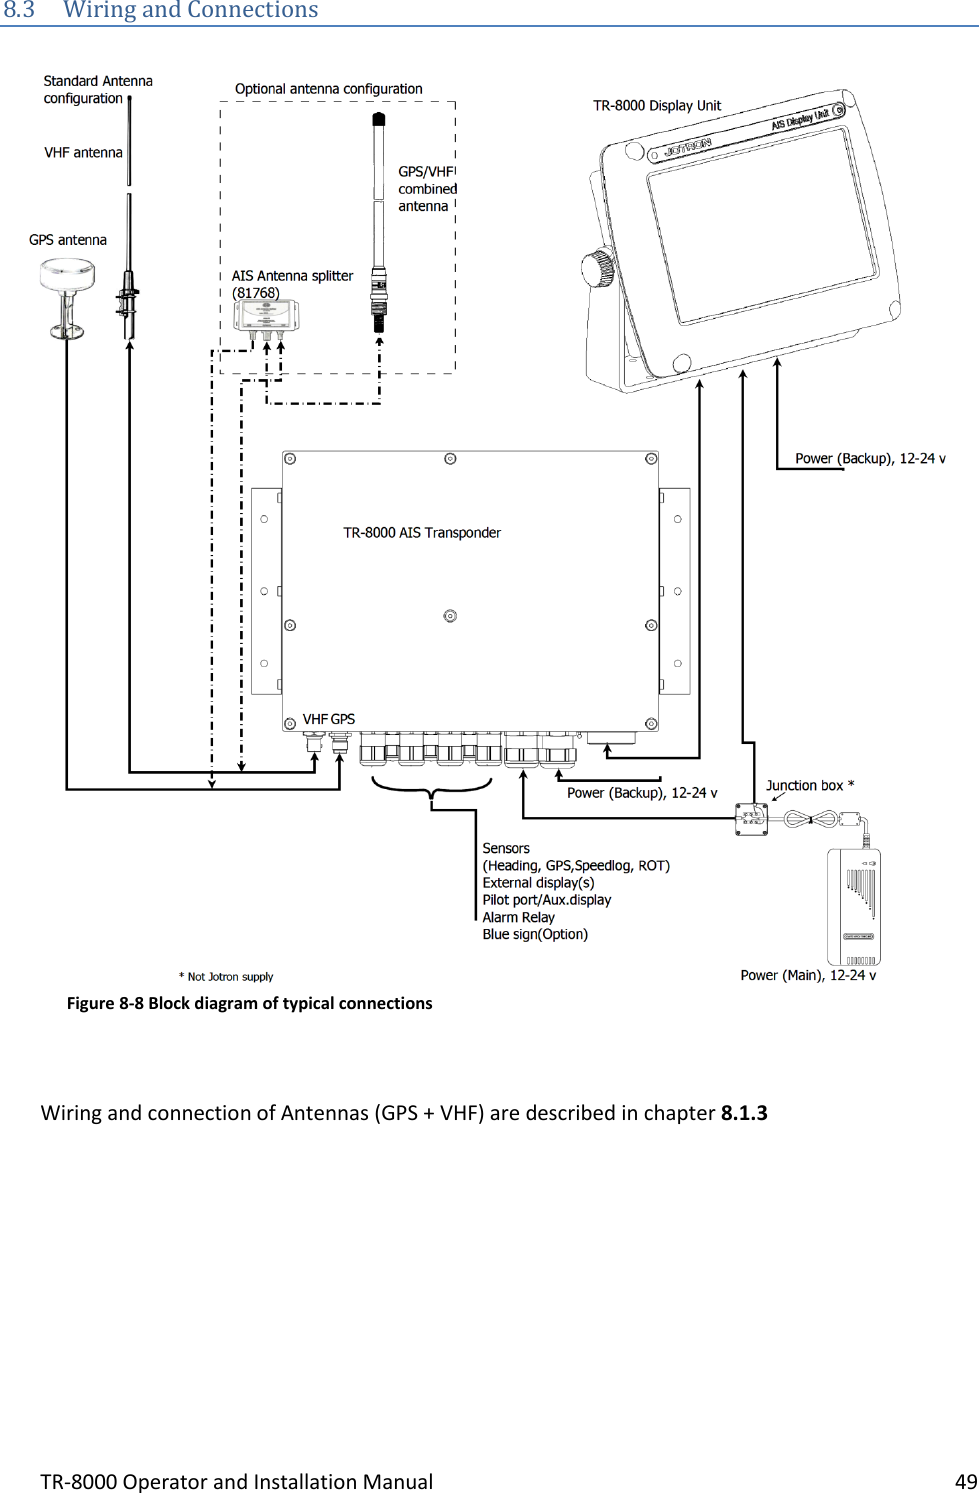 TR-8000 Operator and Installation Manual    49  8.3 Wiring and Connections     Wiring and connection of Antennas (GPS + VHF) are described in chapter 8.1.3     Figure 8-8 Block diagram of typical connections 